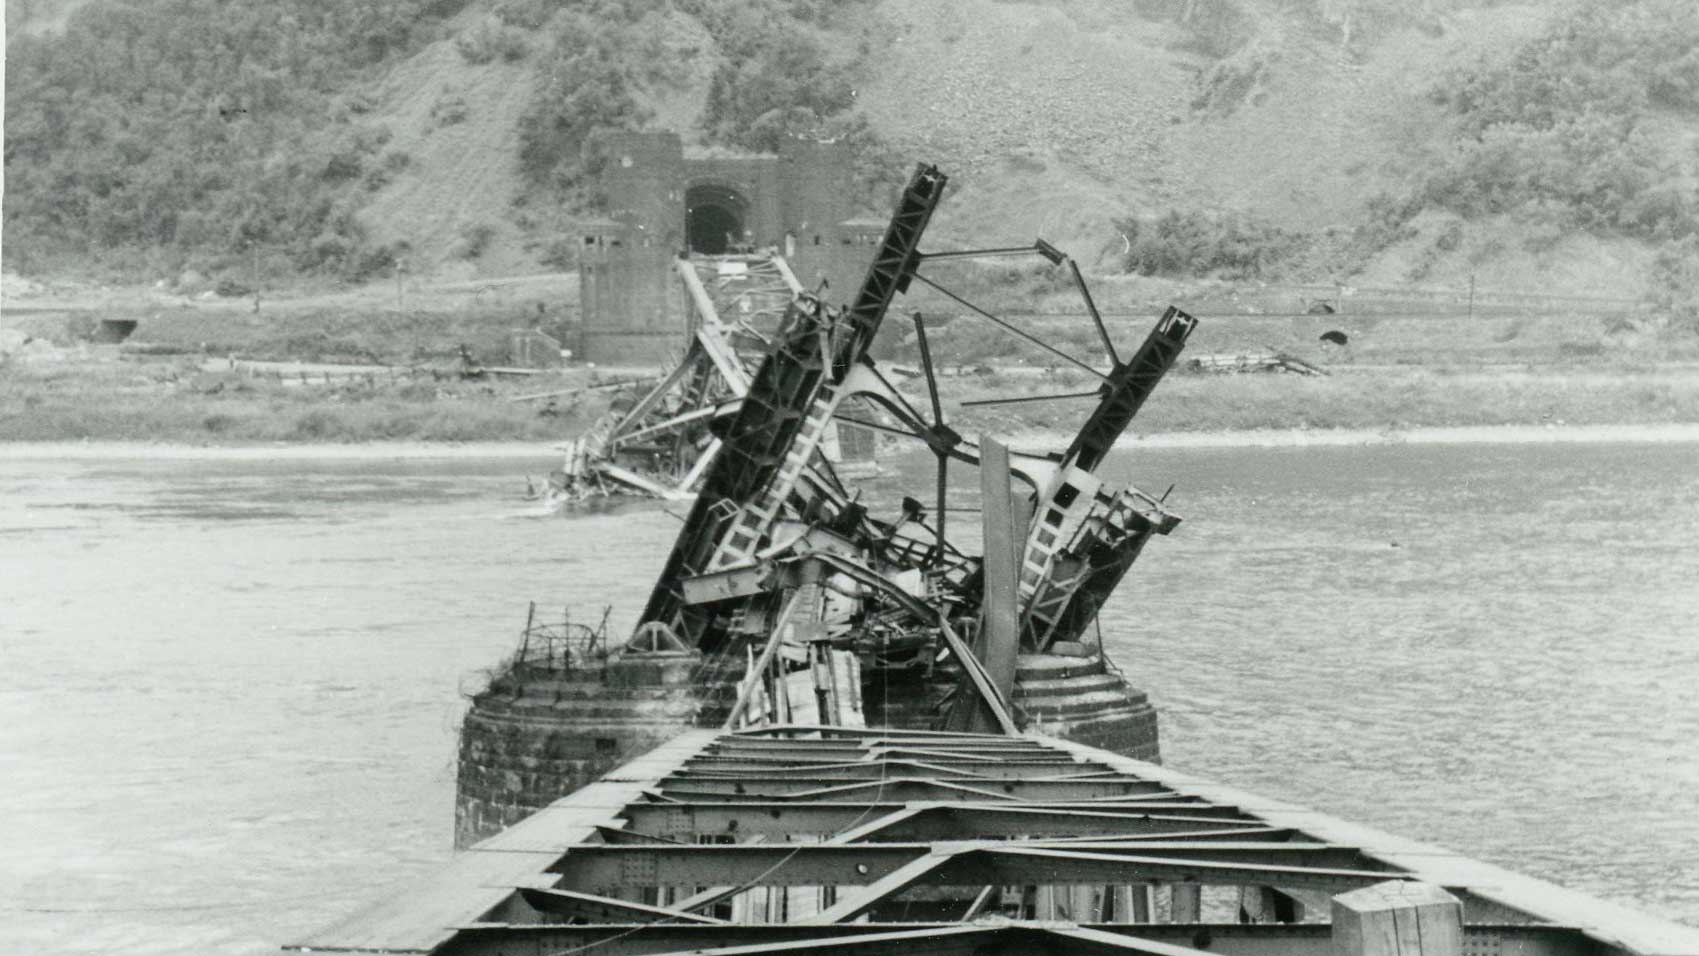 The twisted wreckage of the bridge after its collapse on March 17, 1945.